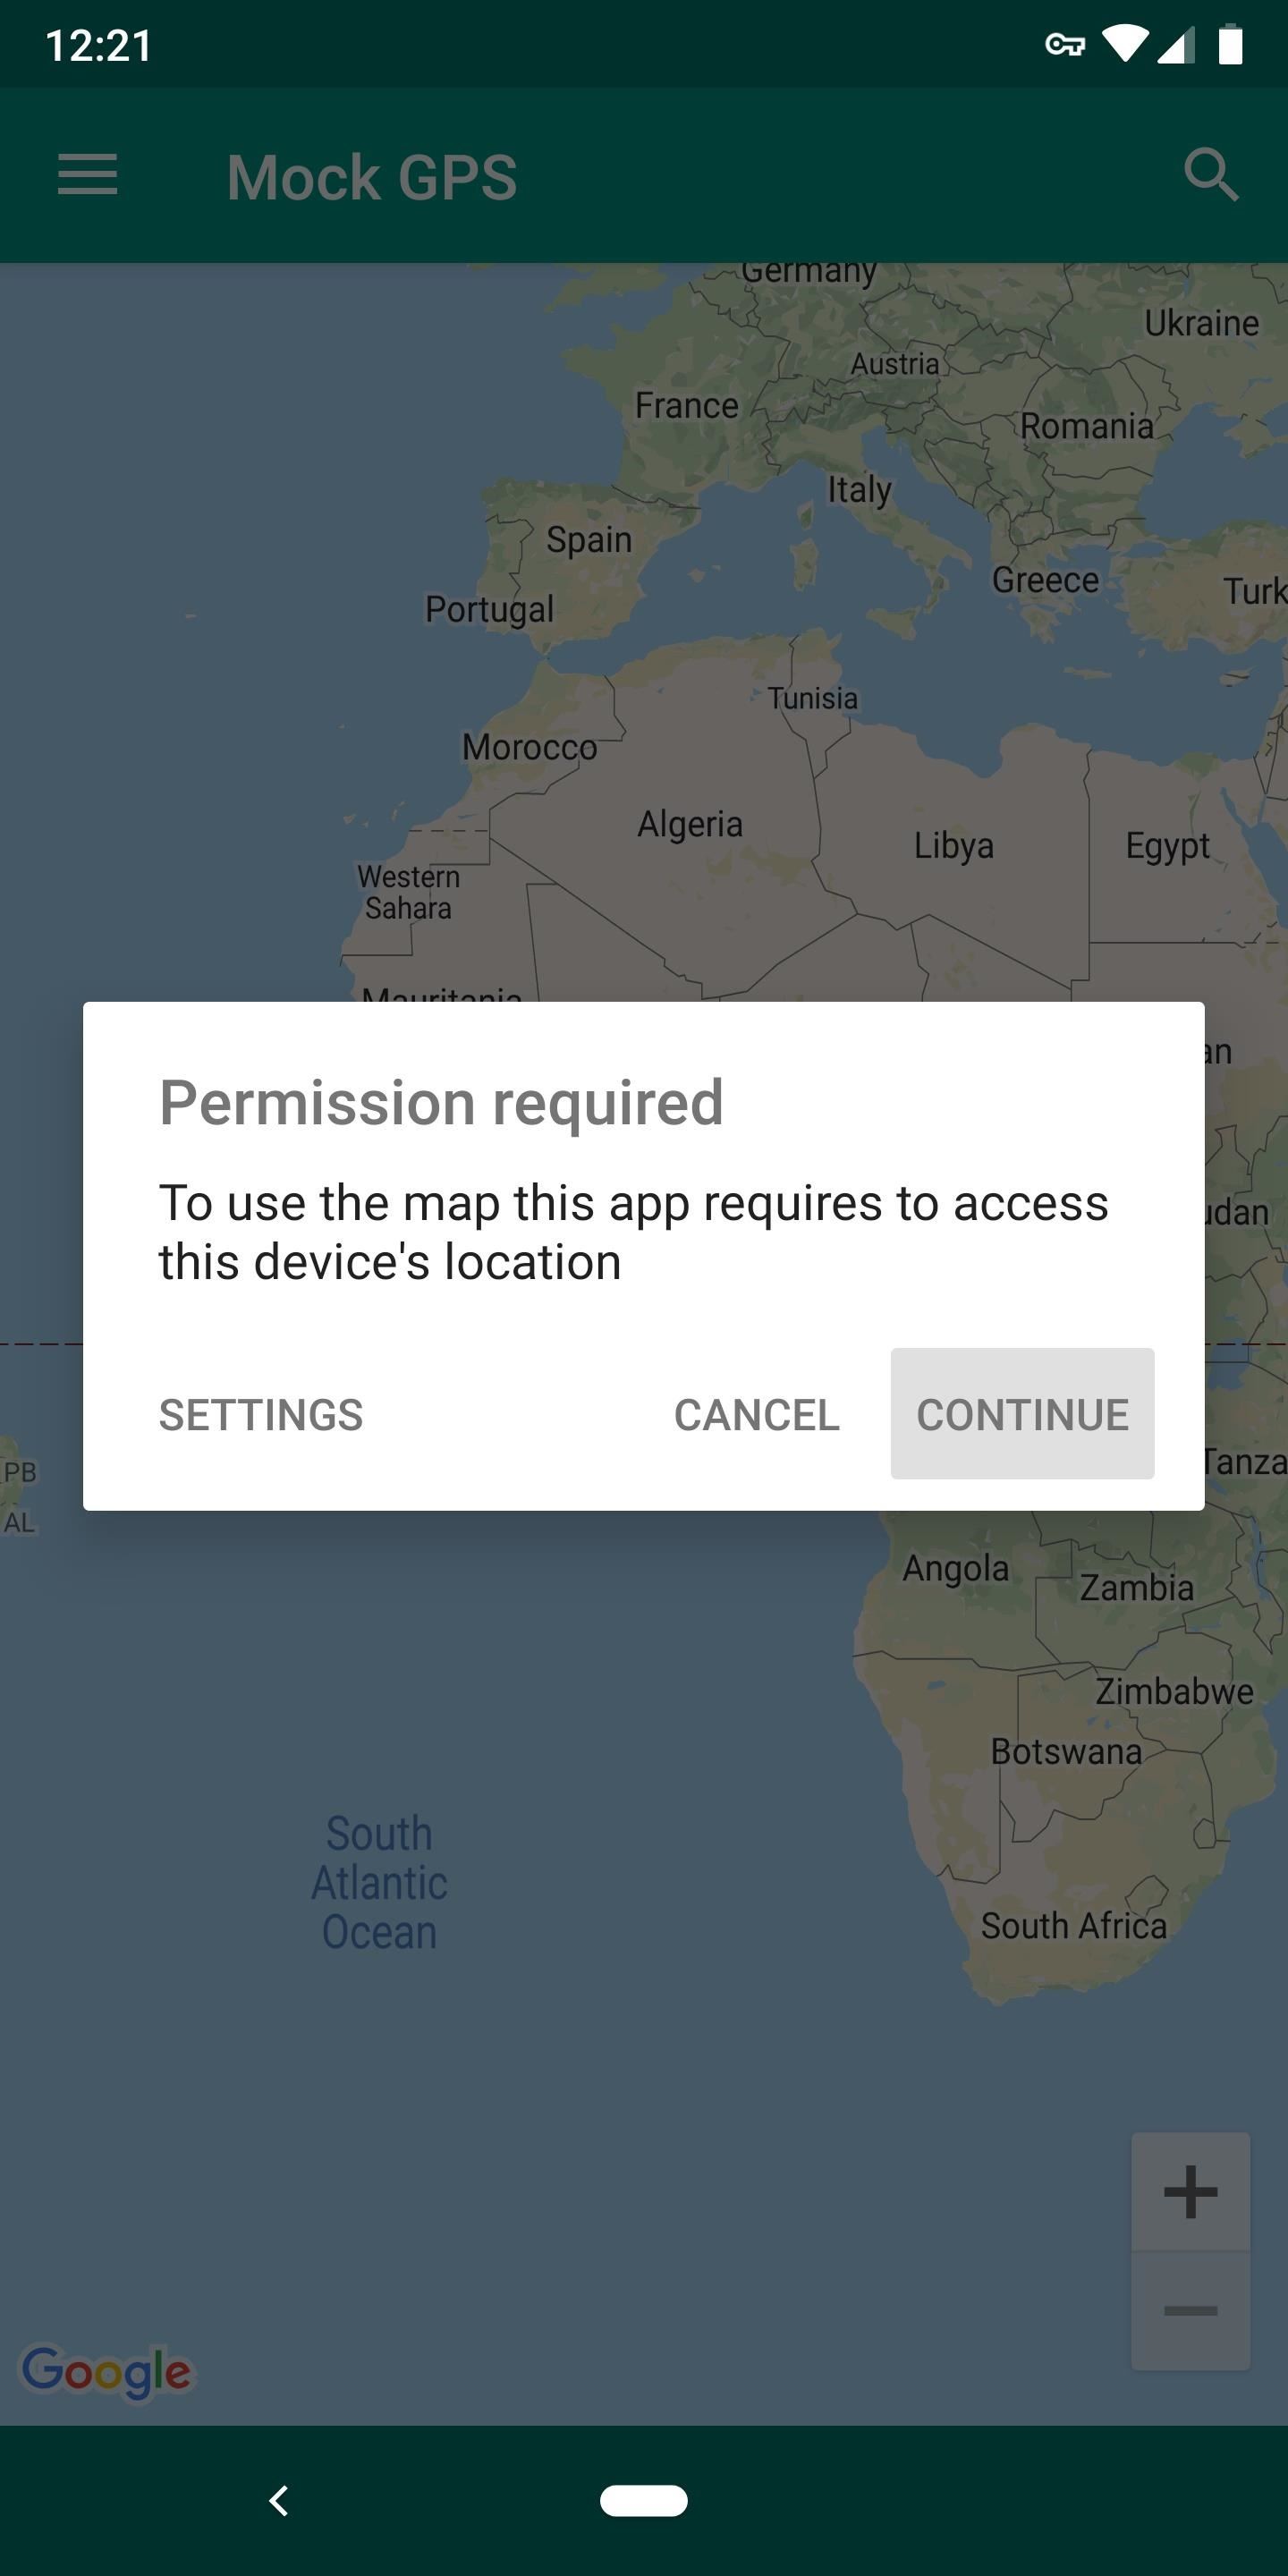 How to Fake Your Location if Your Parents Installed a GPS Tracker on Your Android Phone